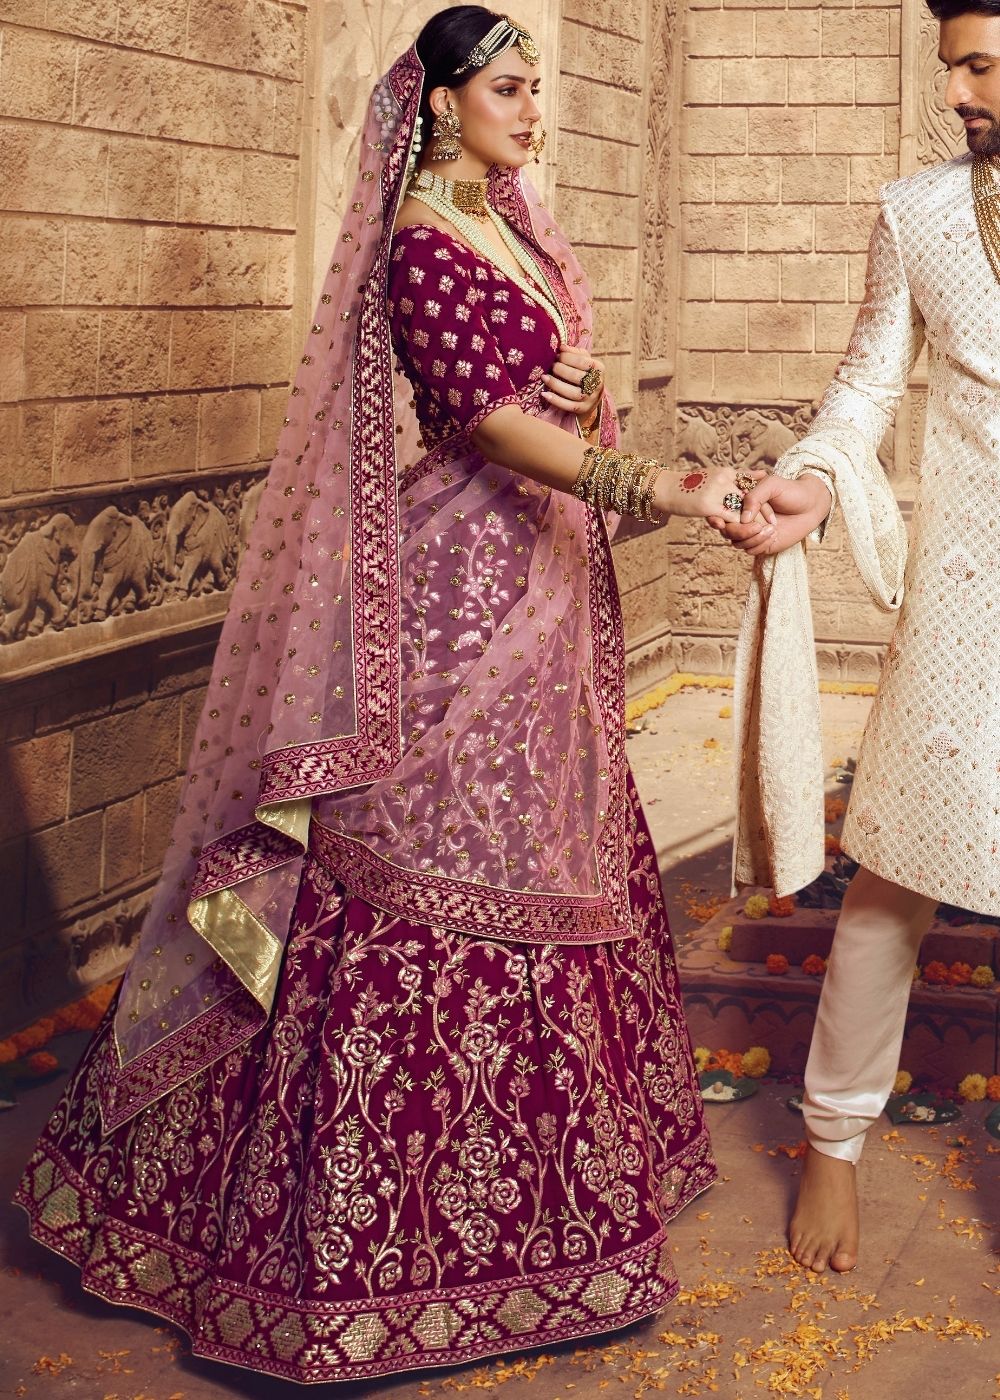 Light Pink Lehenga Ideas For The Bride-To-Be